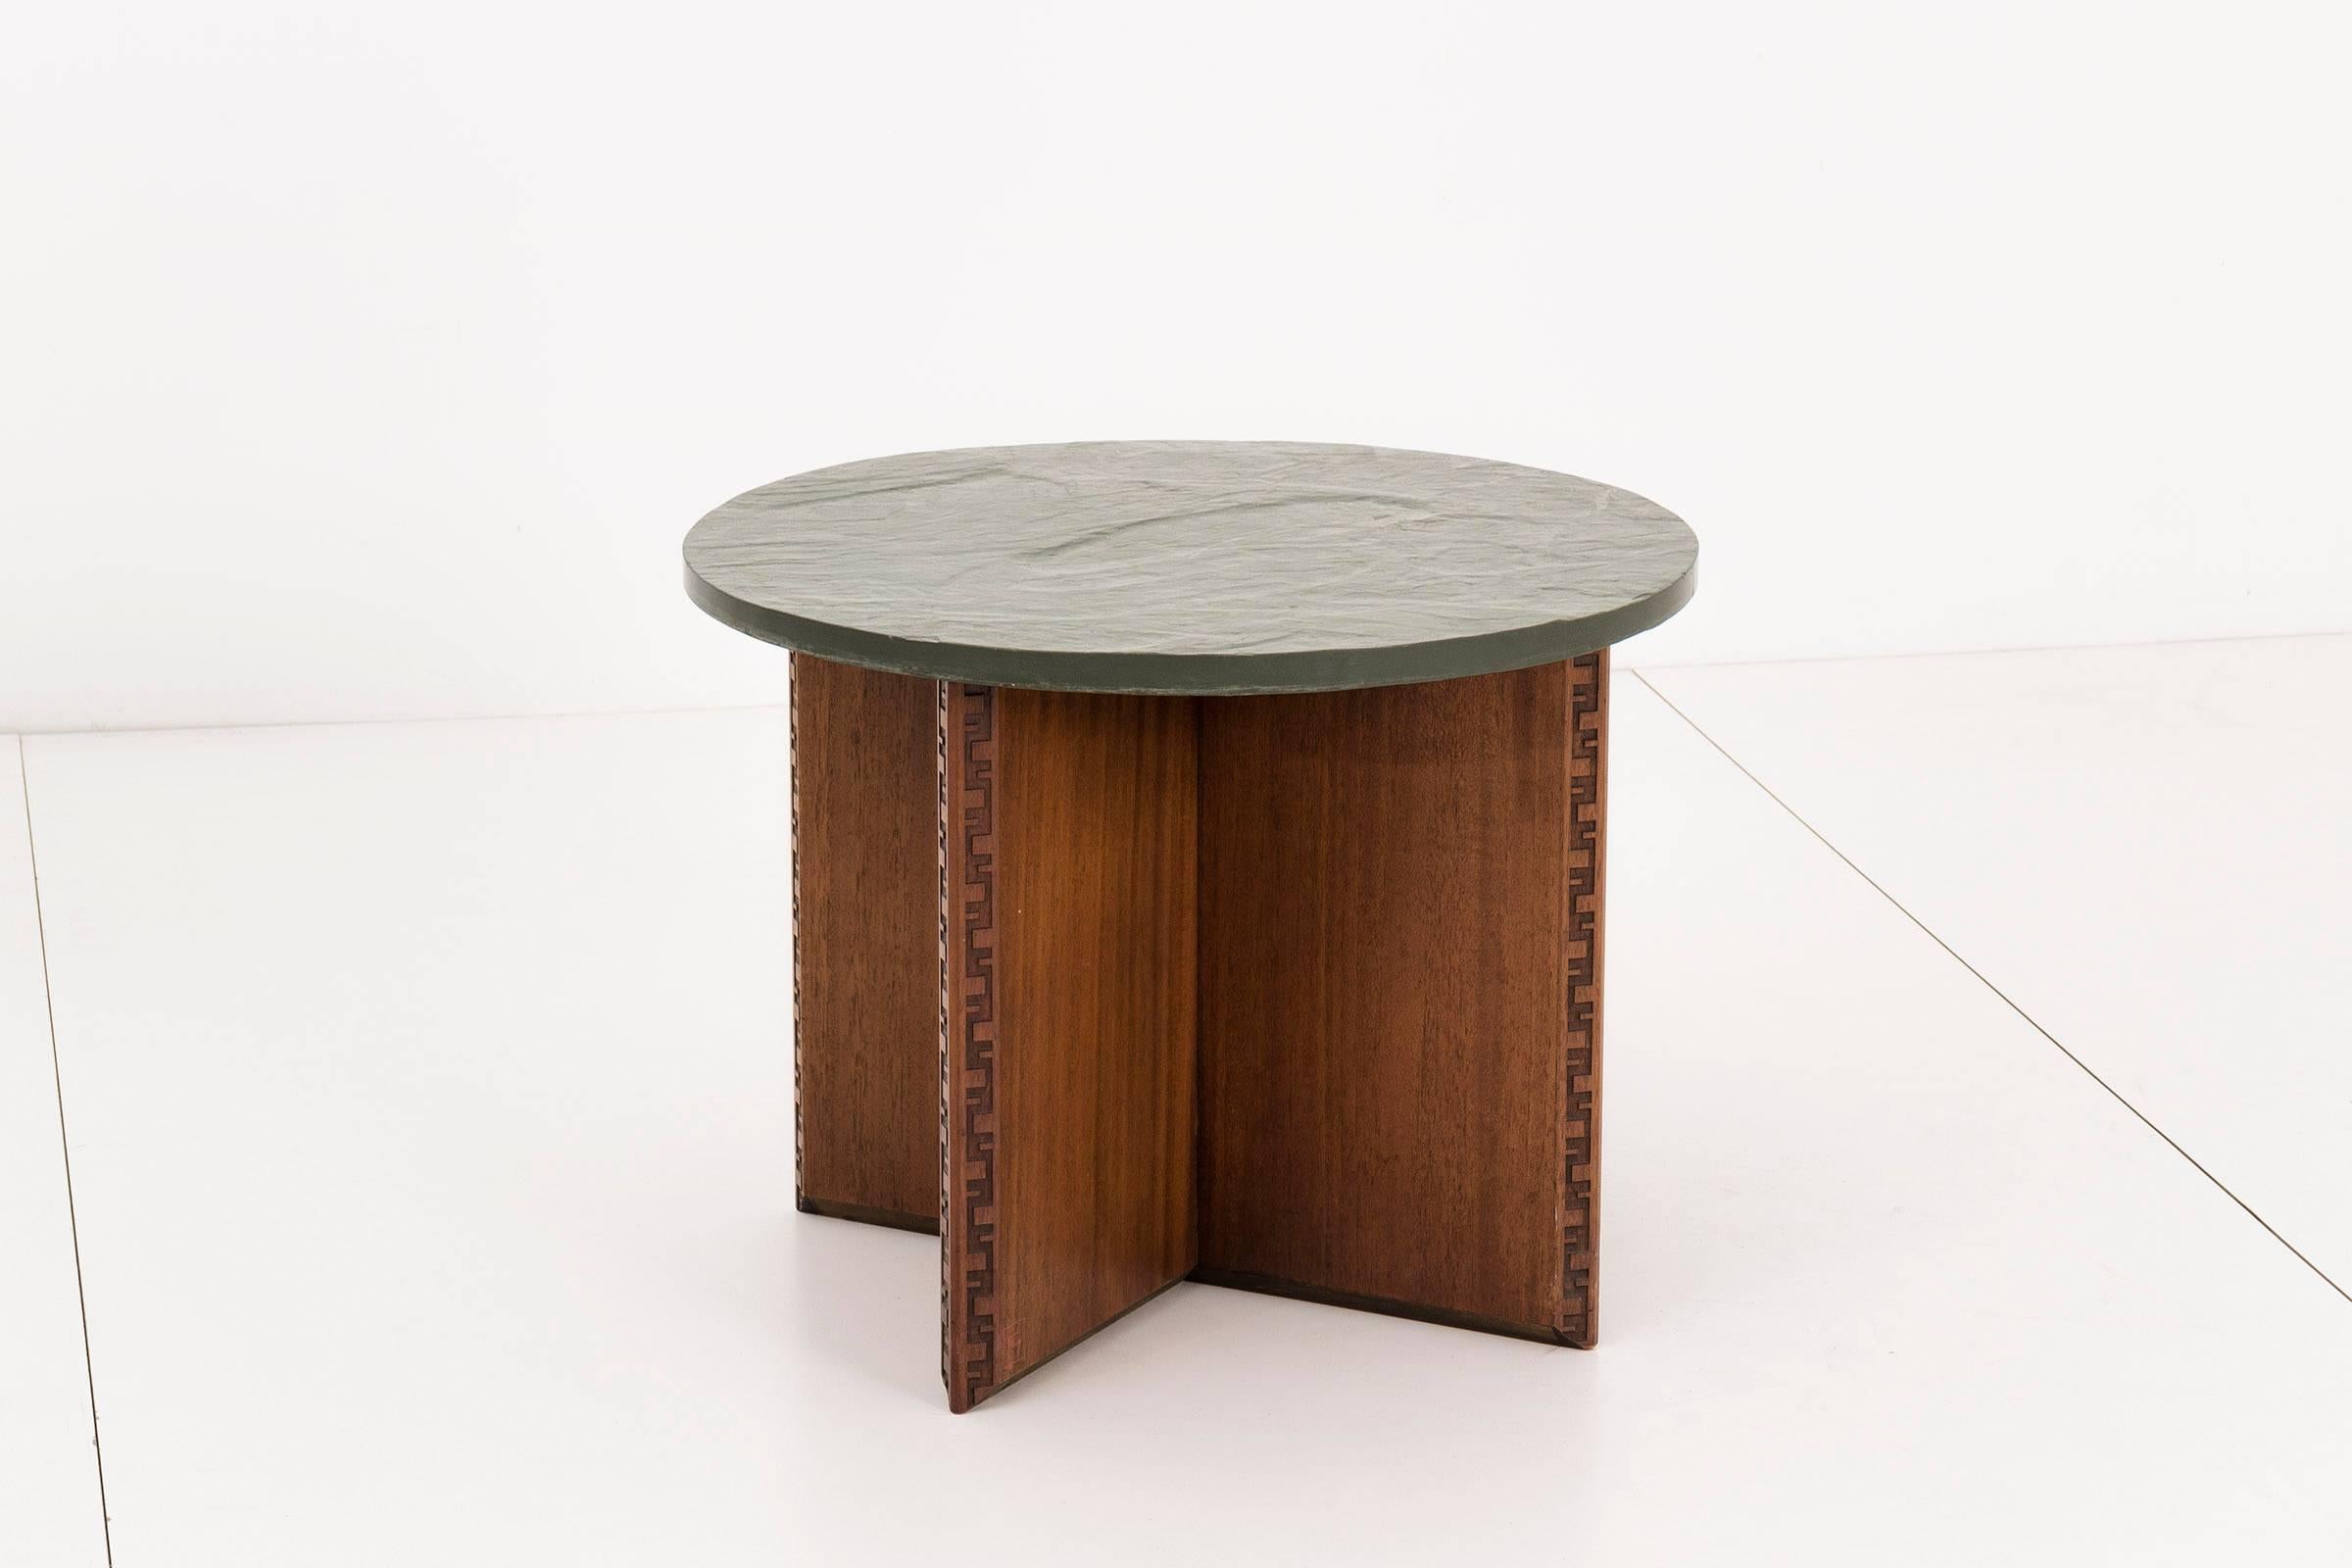 Frank Lloyd Wright for Heritage Henredon collection. Green slate top on a mahogany base. With signature Taliesin carving details. Factory stamped on base [Heritage Henredon by Frank Lloyd Wright]
(Chairs pictured sold separately as a set of four).